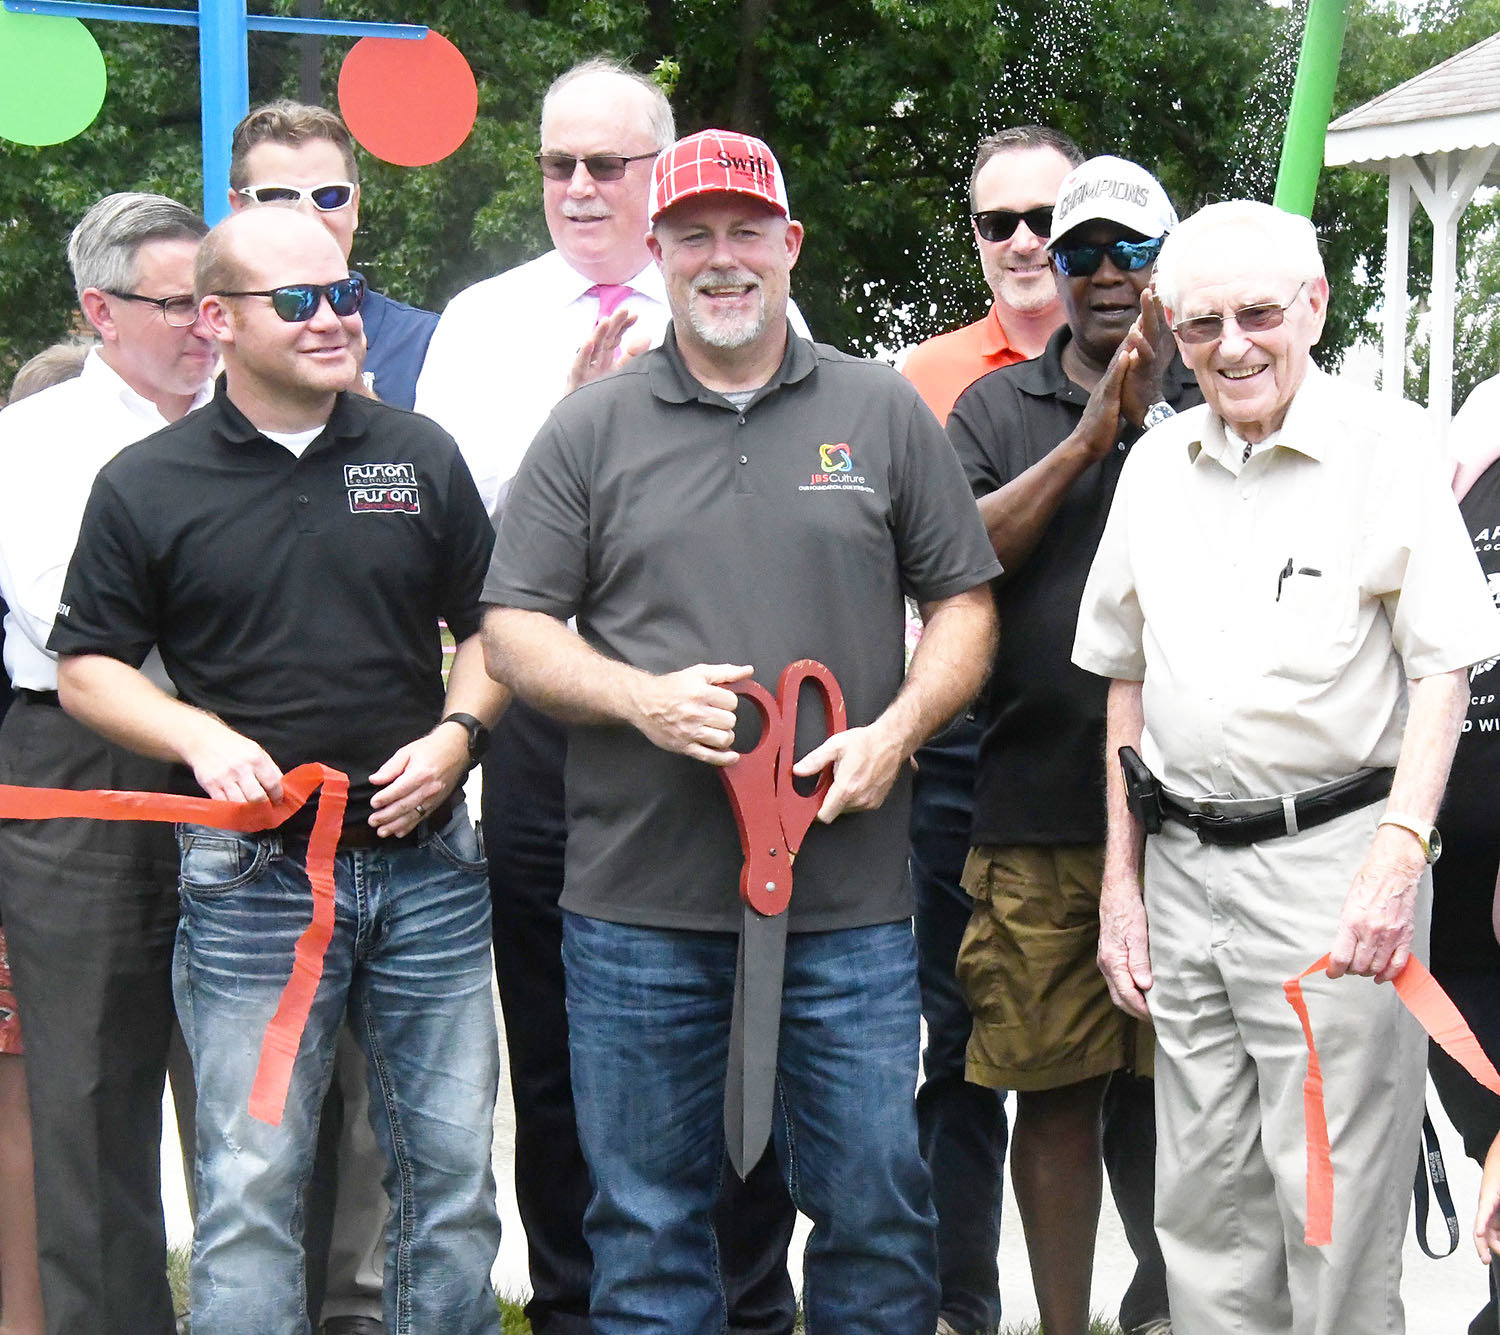 Councilman Brandon Lucas, Joe Machetta from Swift Prepared Foods, Moberly Parks and Recreation Department board members Harley Mattox and Don Hughes, Central Bank's John Meystrik, Moberly city manager Brian Crane, mayor Jerry Jeffrey and insurance broker Brian Skaggs helped cut the ribbon on Friday, July 8.